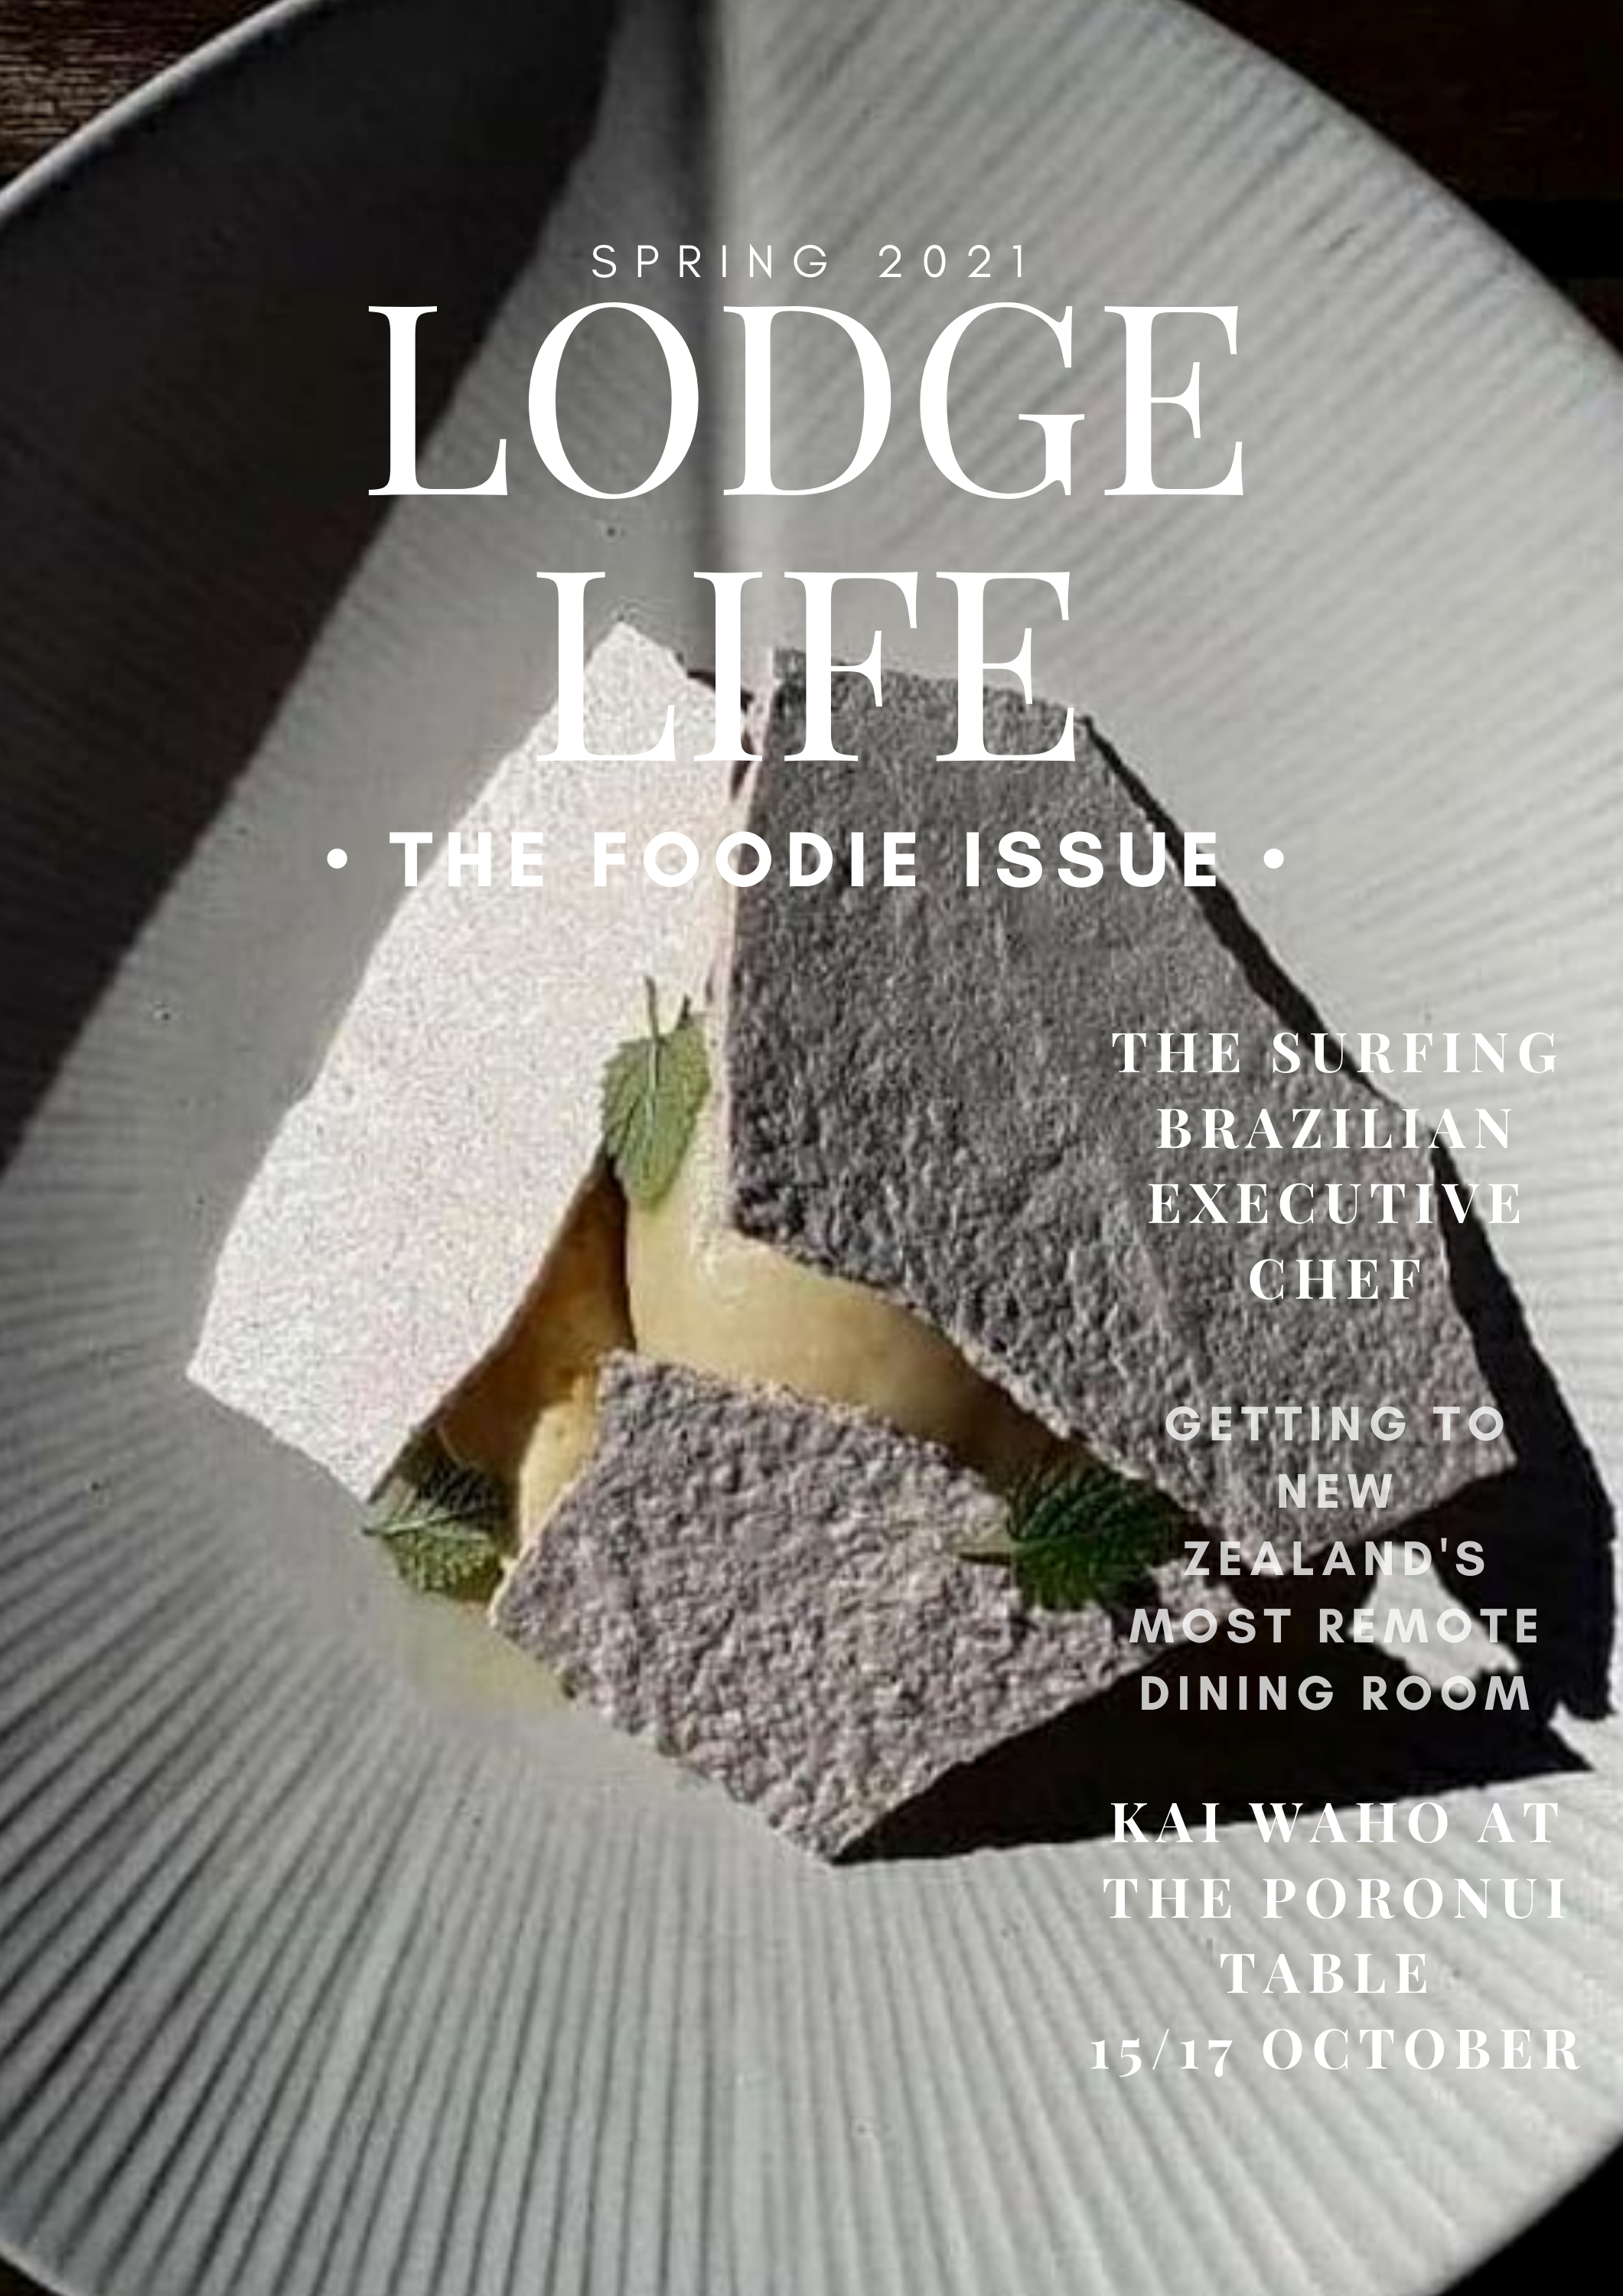 Lodge Life - The Foodie Issue